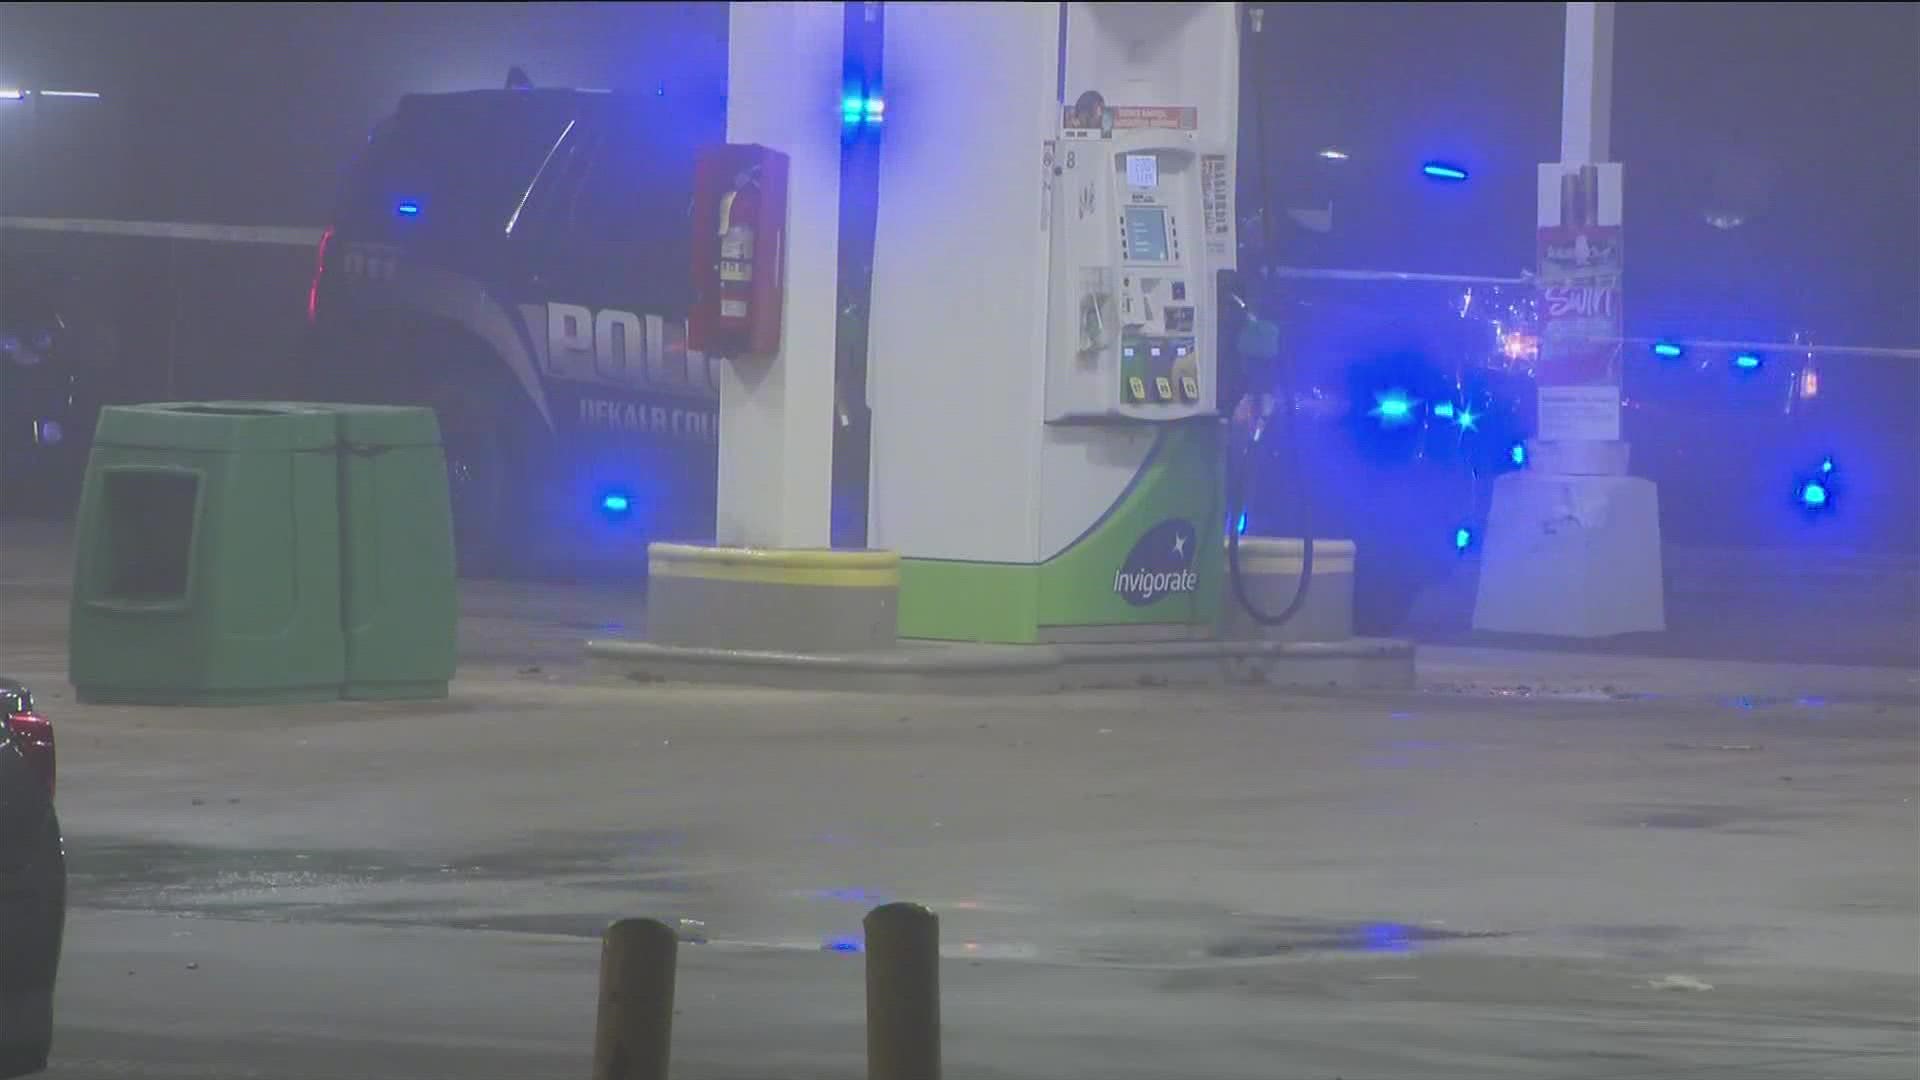 DeKalb Police said officers responded shortly after 6:20 p.m. at the 4700 block of Redan Road, which is near the BP gas station.